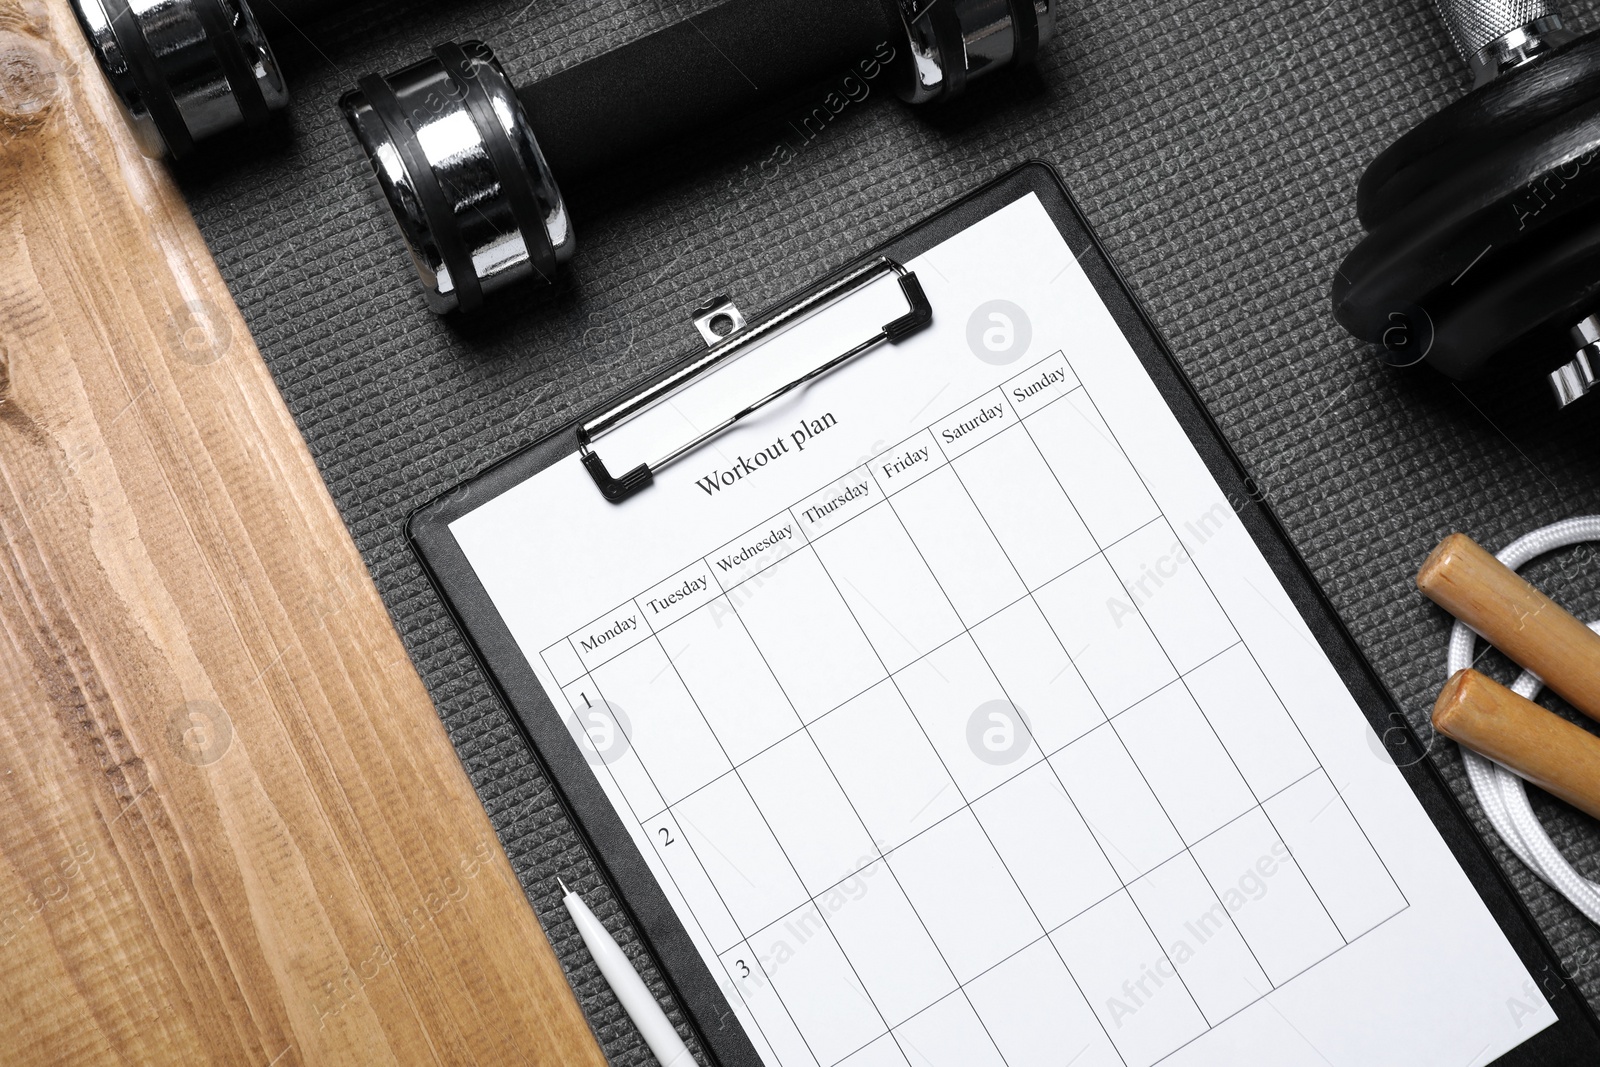 Photo of Clipboard with workout plan and sports equipment on wooden table, flat lay. Personal training